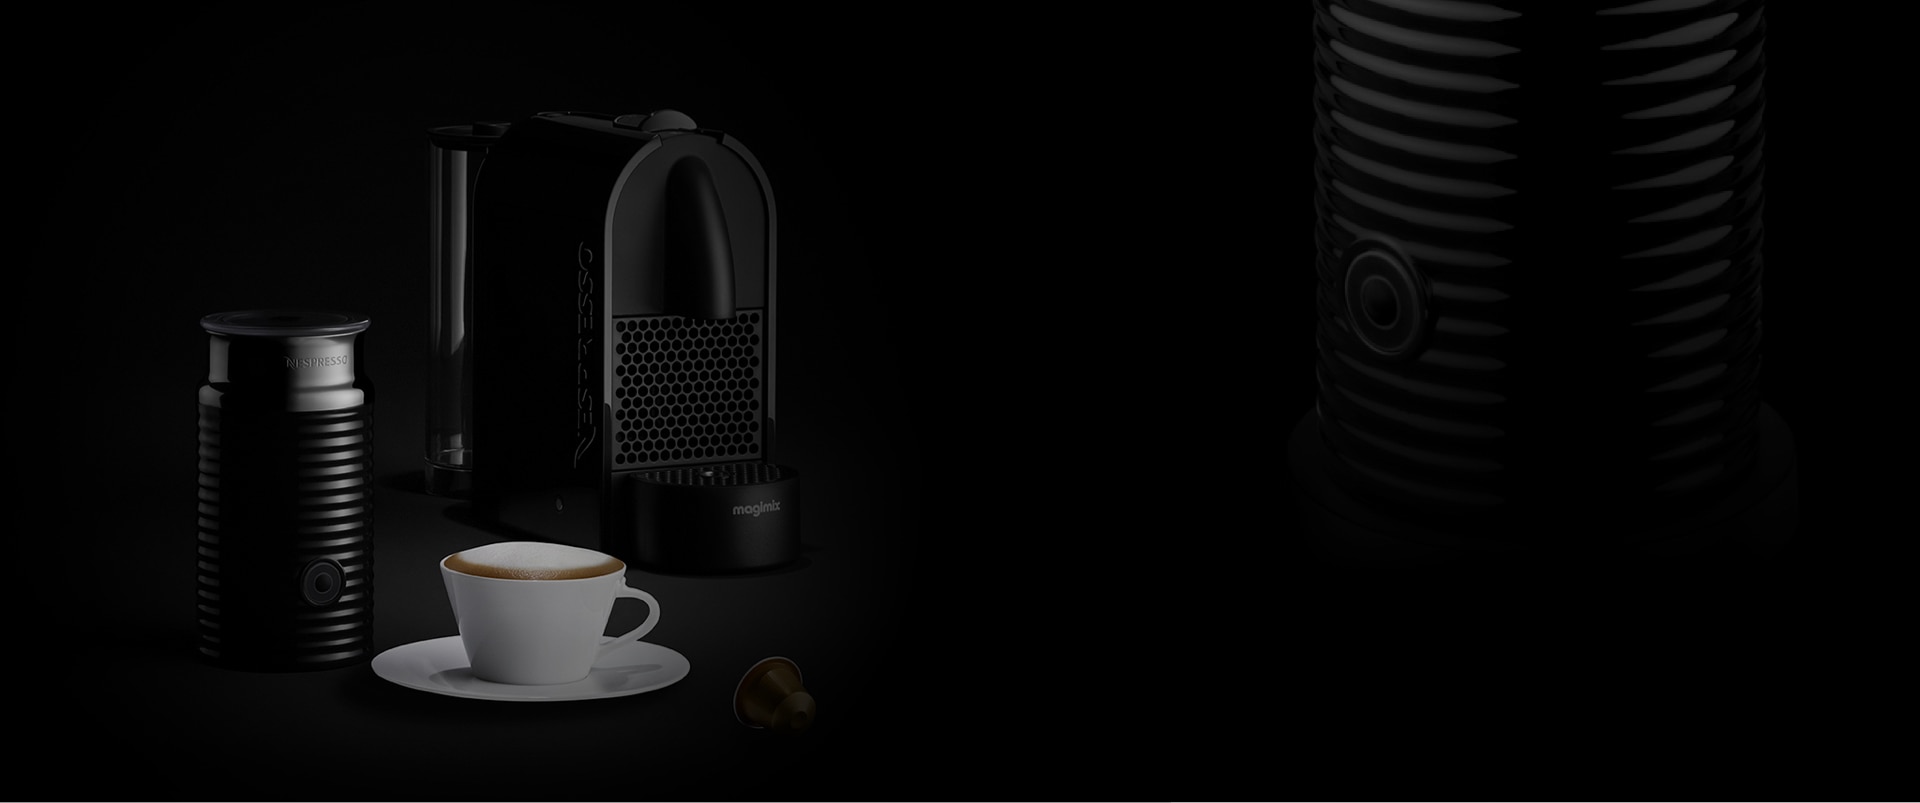 https://www.nespresso.com/shared_res/agility/accessories/aeroccino3/img/introduction/placeholder_L.jpg